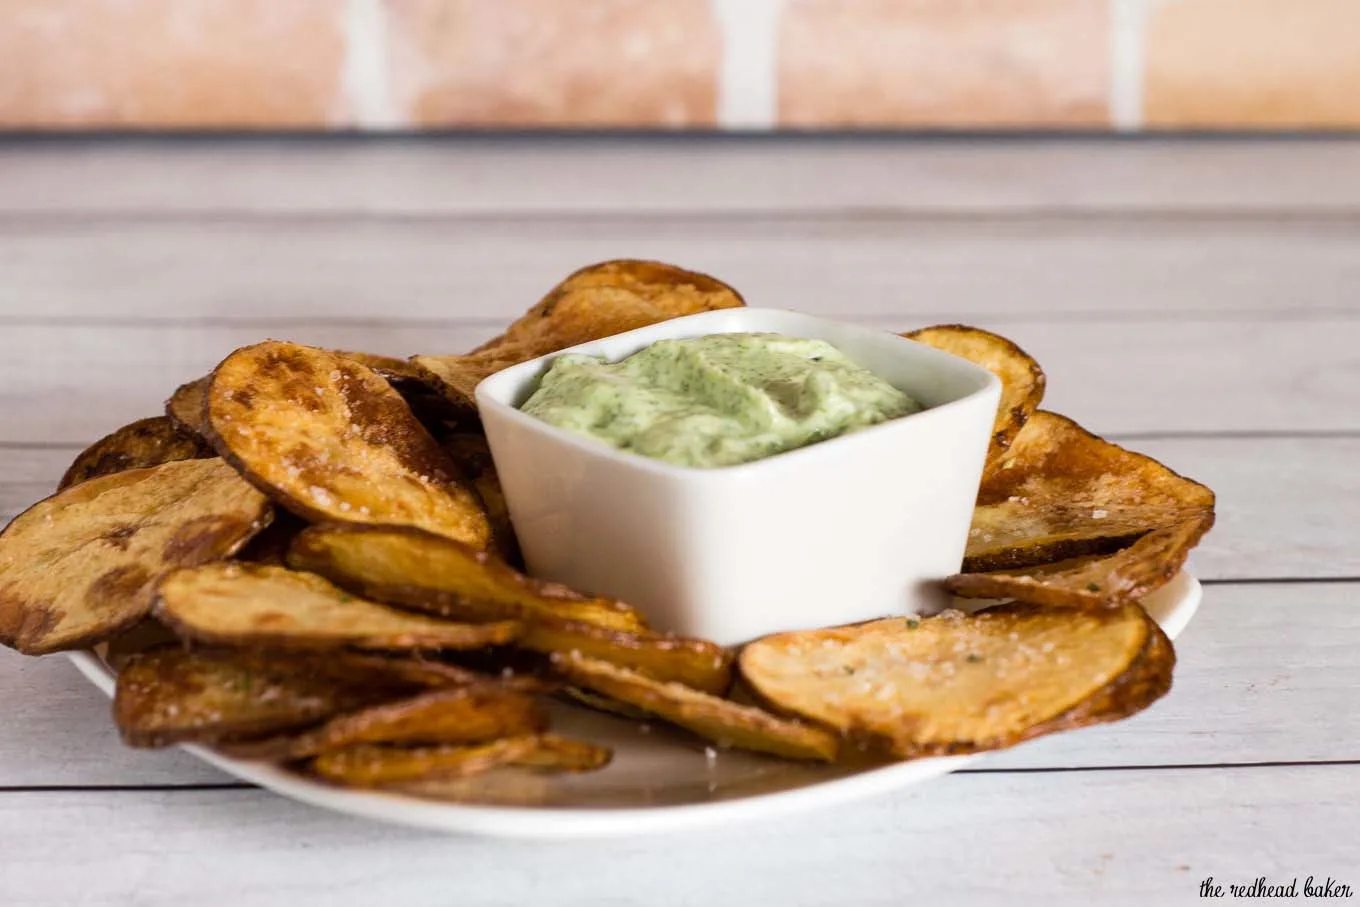 Rosemary potato chips: you can't get this flavor in a bag of store-bought chips! Dunk these crispy chips in a dip of fresh herb aioli for even more flavor. #ProgressiveEats